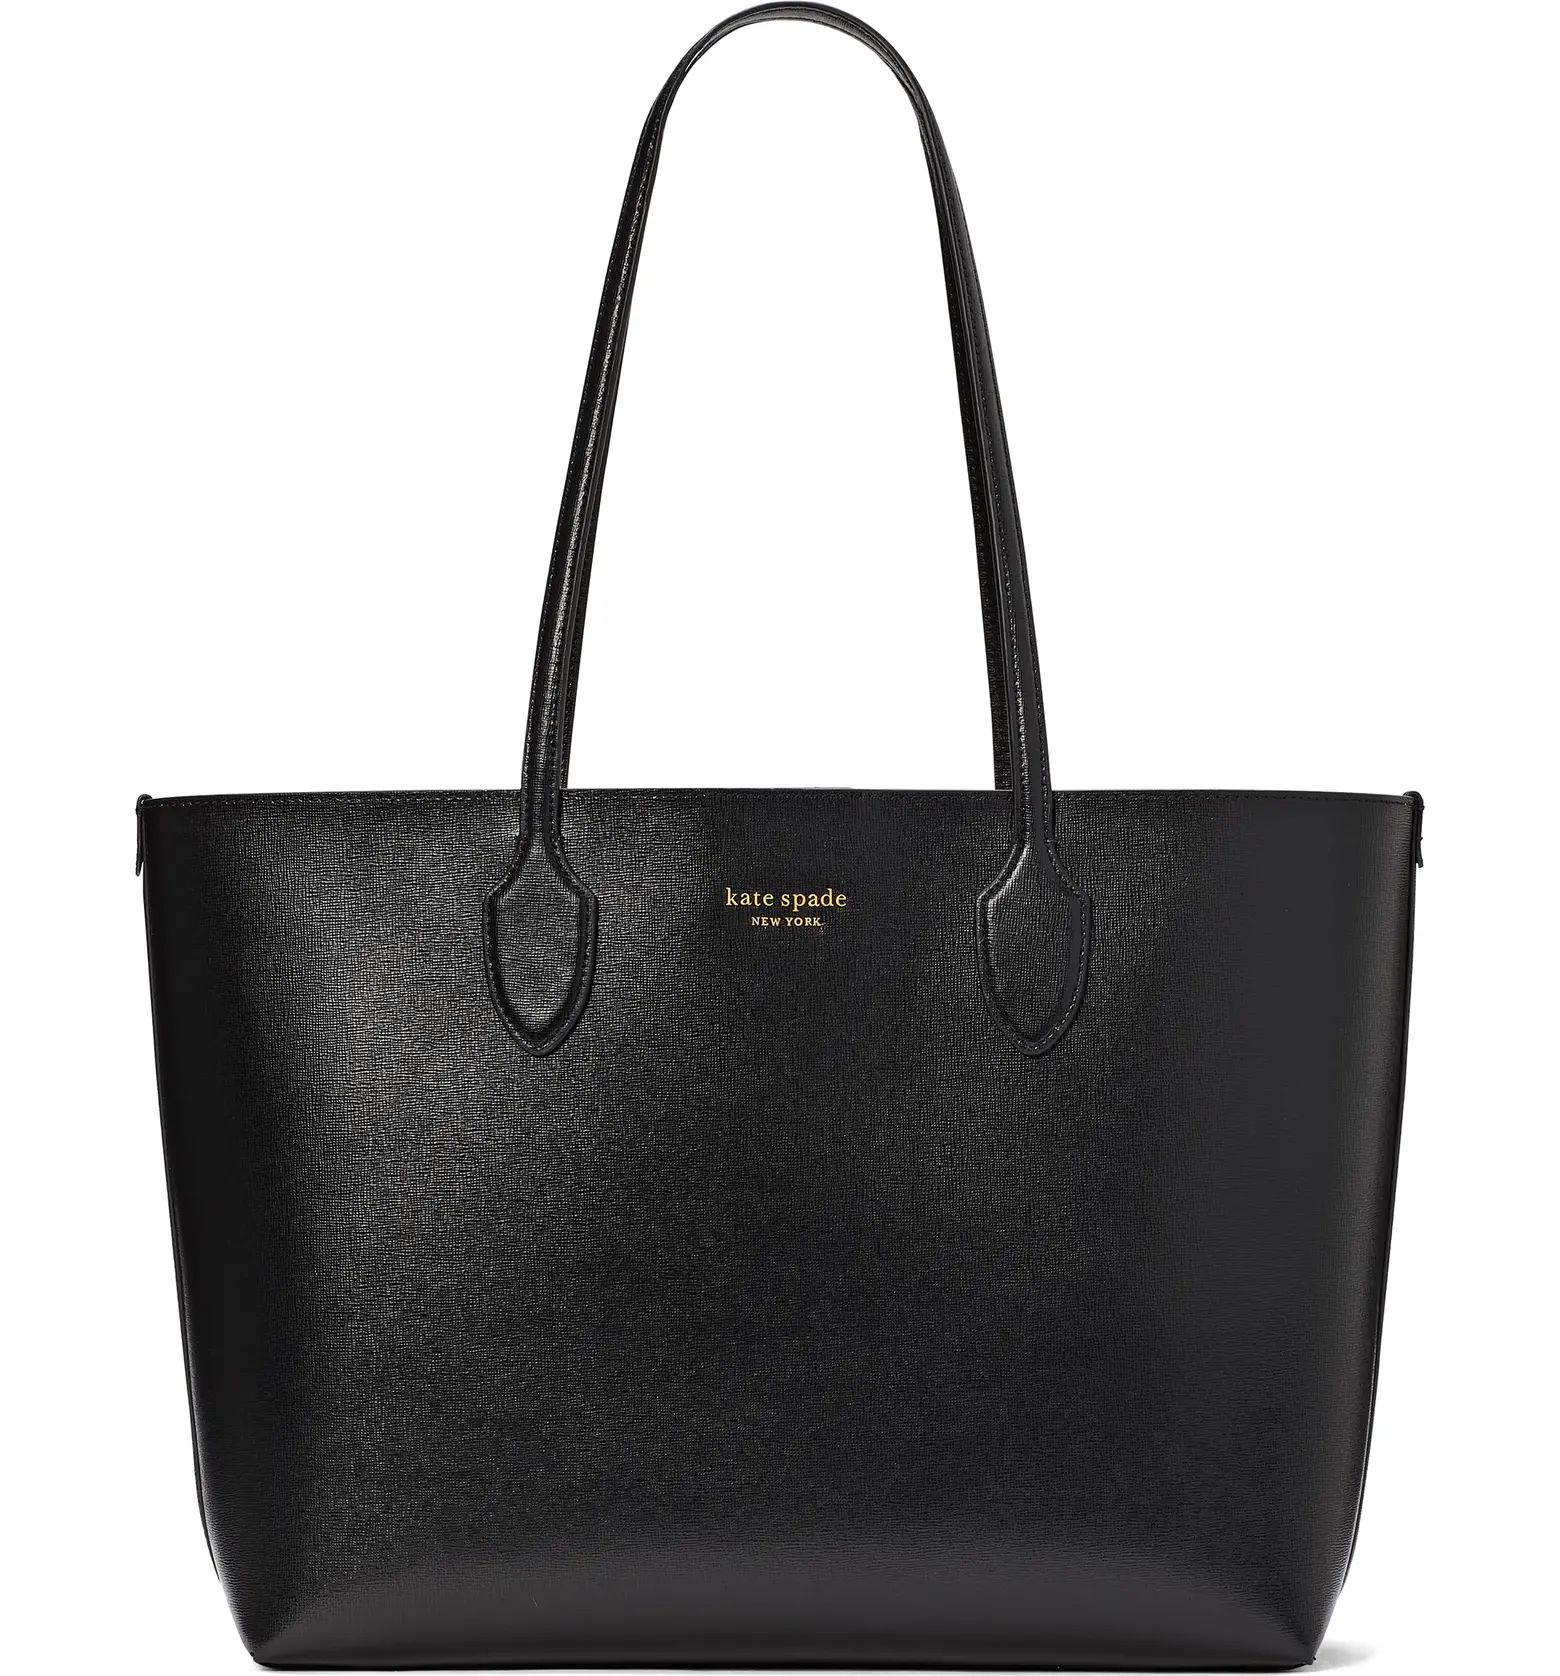 large bleecker leather tote | Nordstrom